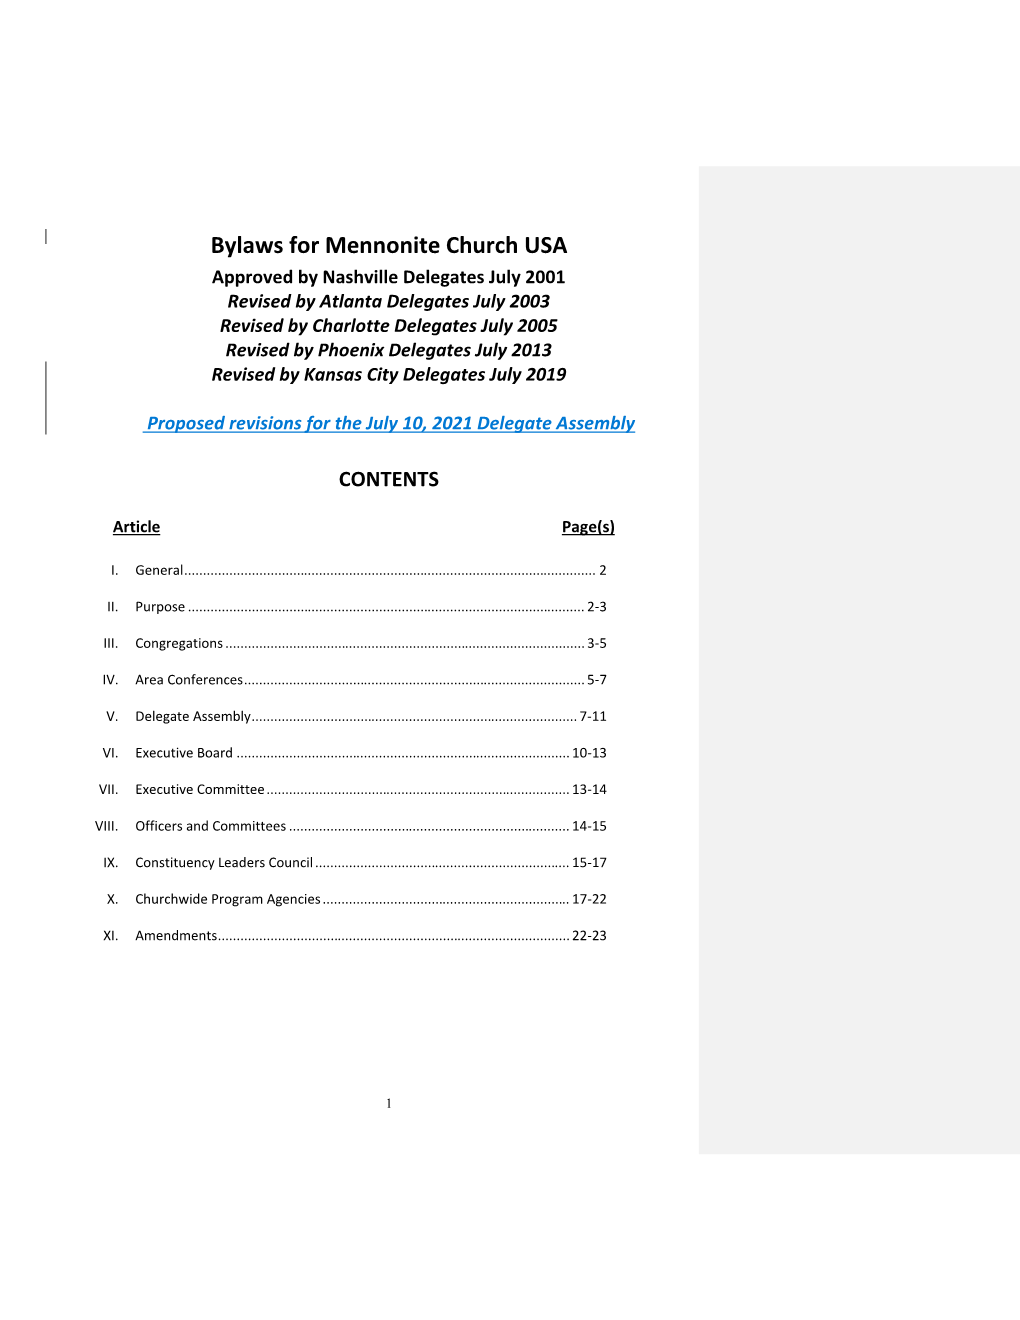 Proposed Revisions to the Bylaws for Mennonite Church